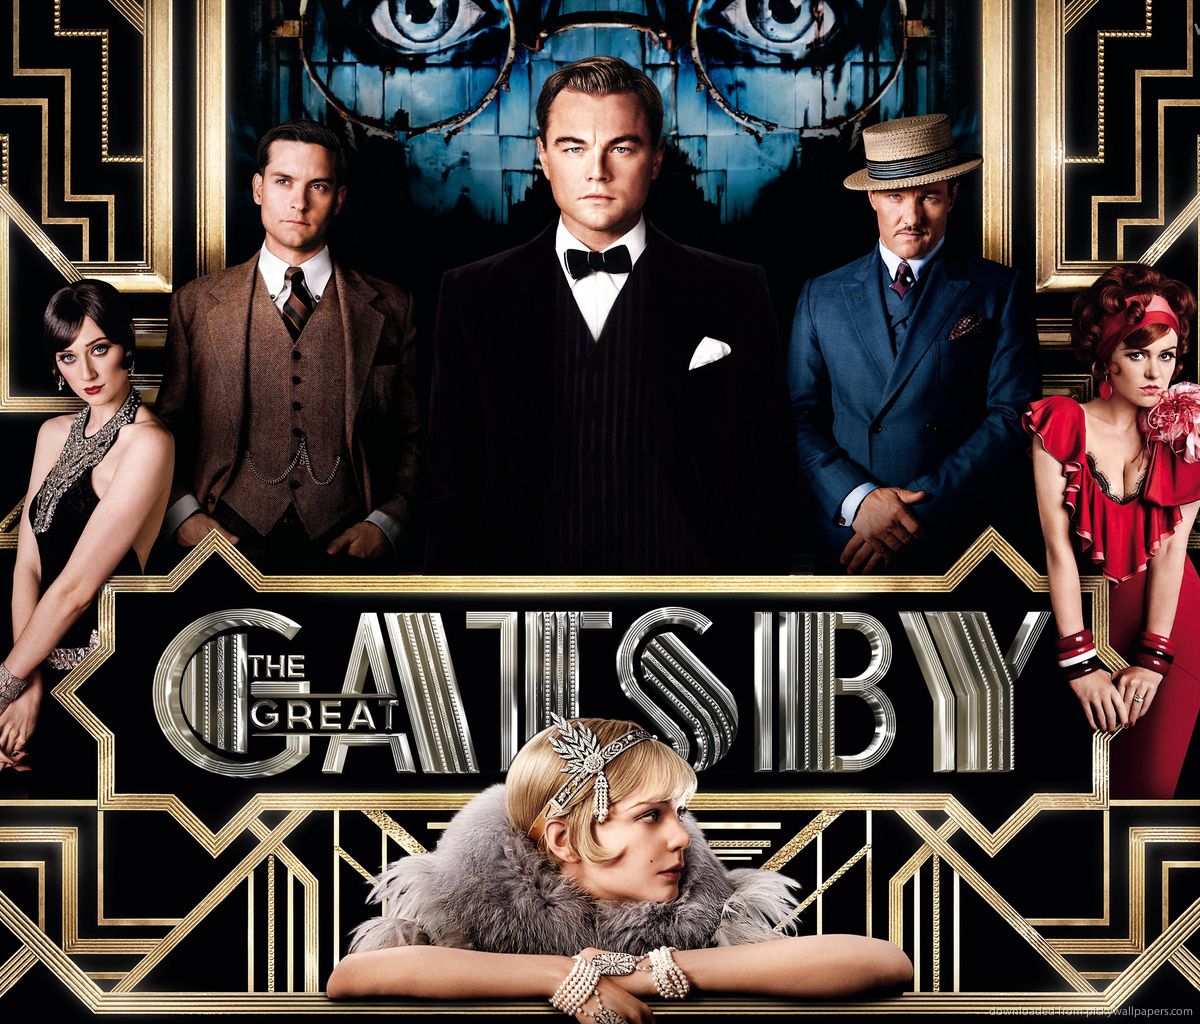 Download The Great Gatsby Poster Wallpaper For Samsung Galaxy Tab